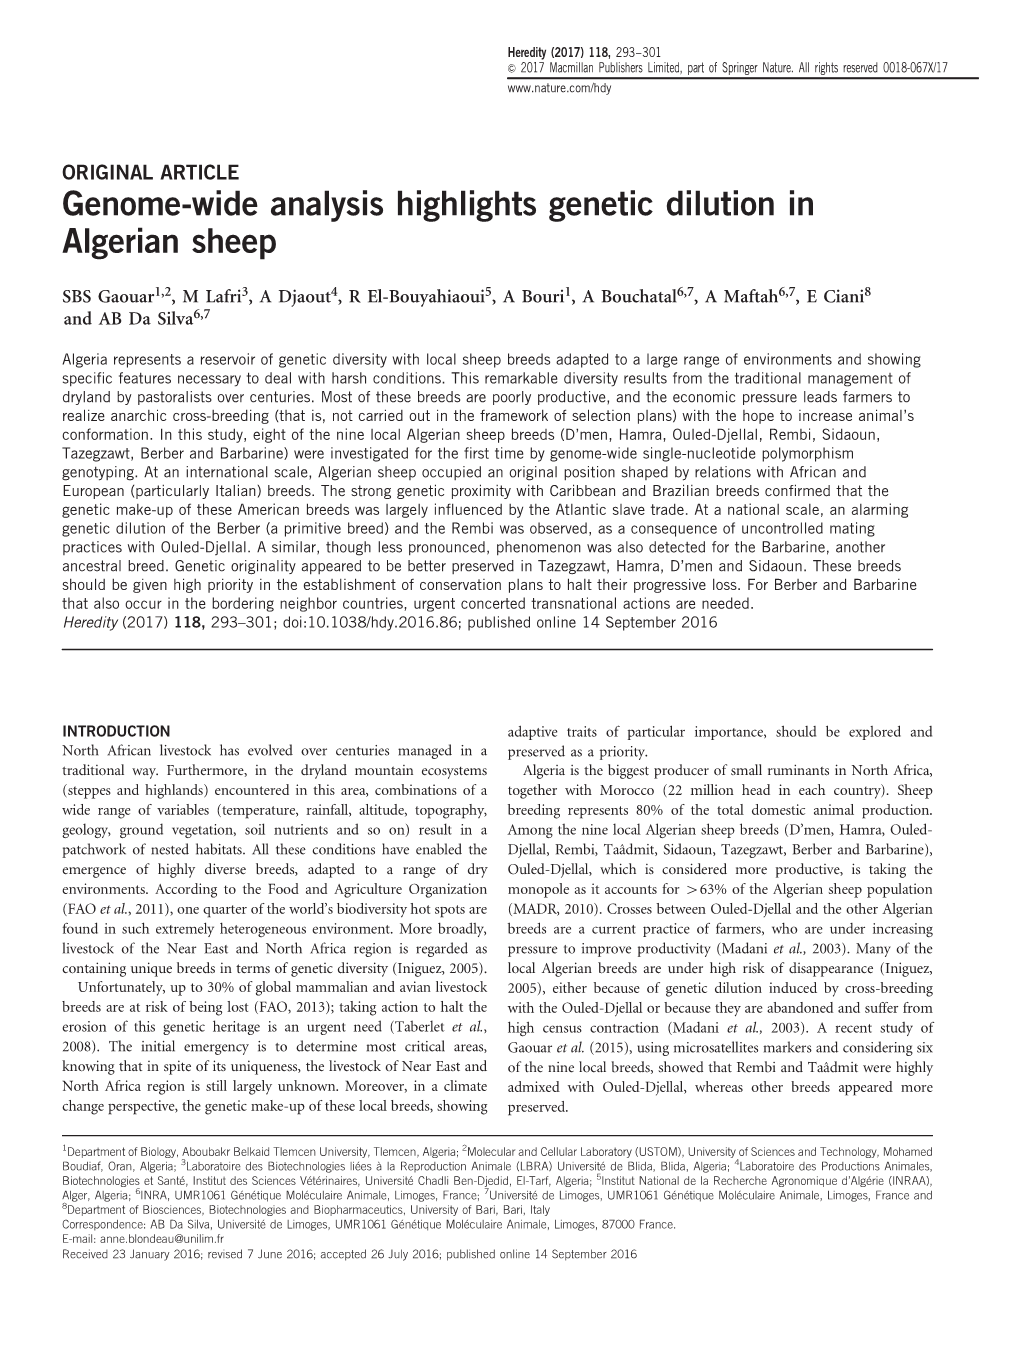 Genome-Wide Analysis Highlights Genetic Dilution in Algerian Sheep